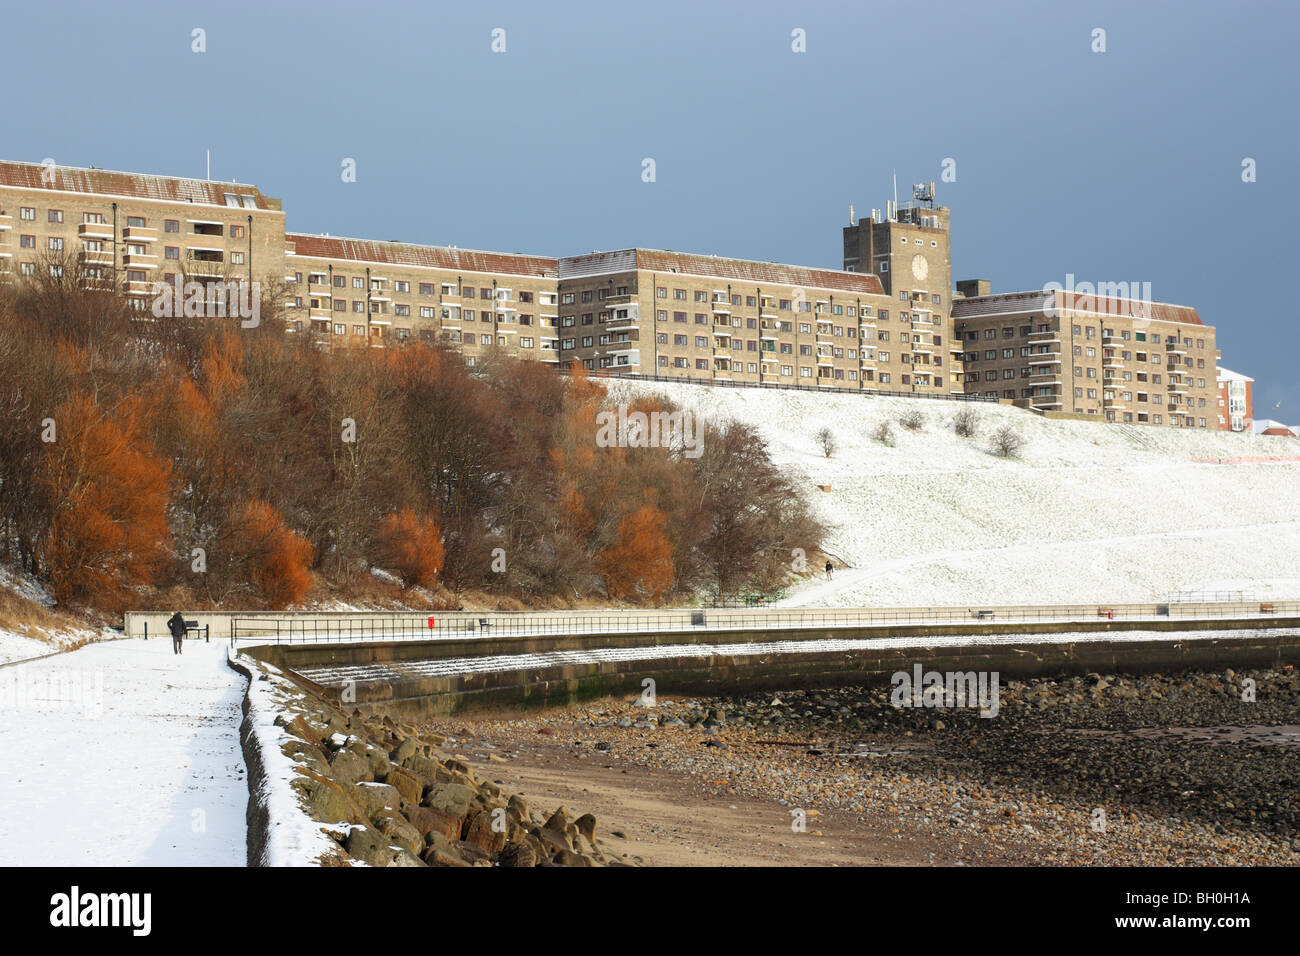 Sir James Knott Memorial Flats, seen in wintry conditions, Tynemouth, England, UK Stock Photo